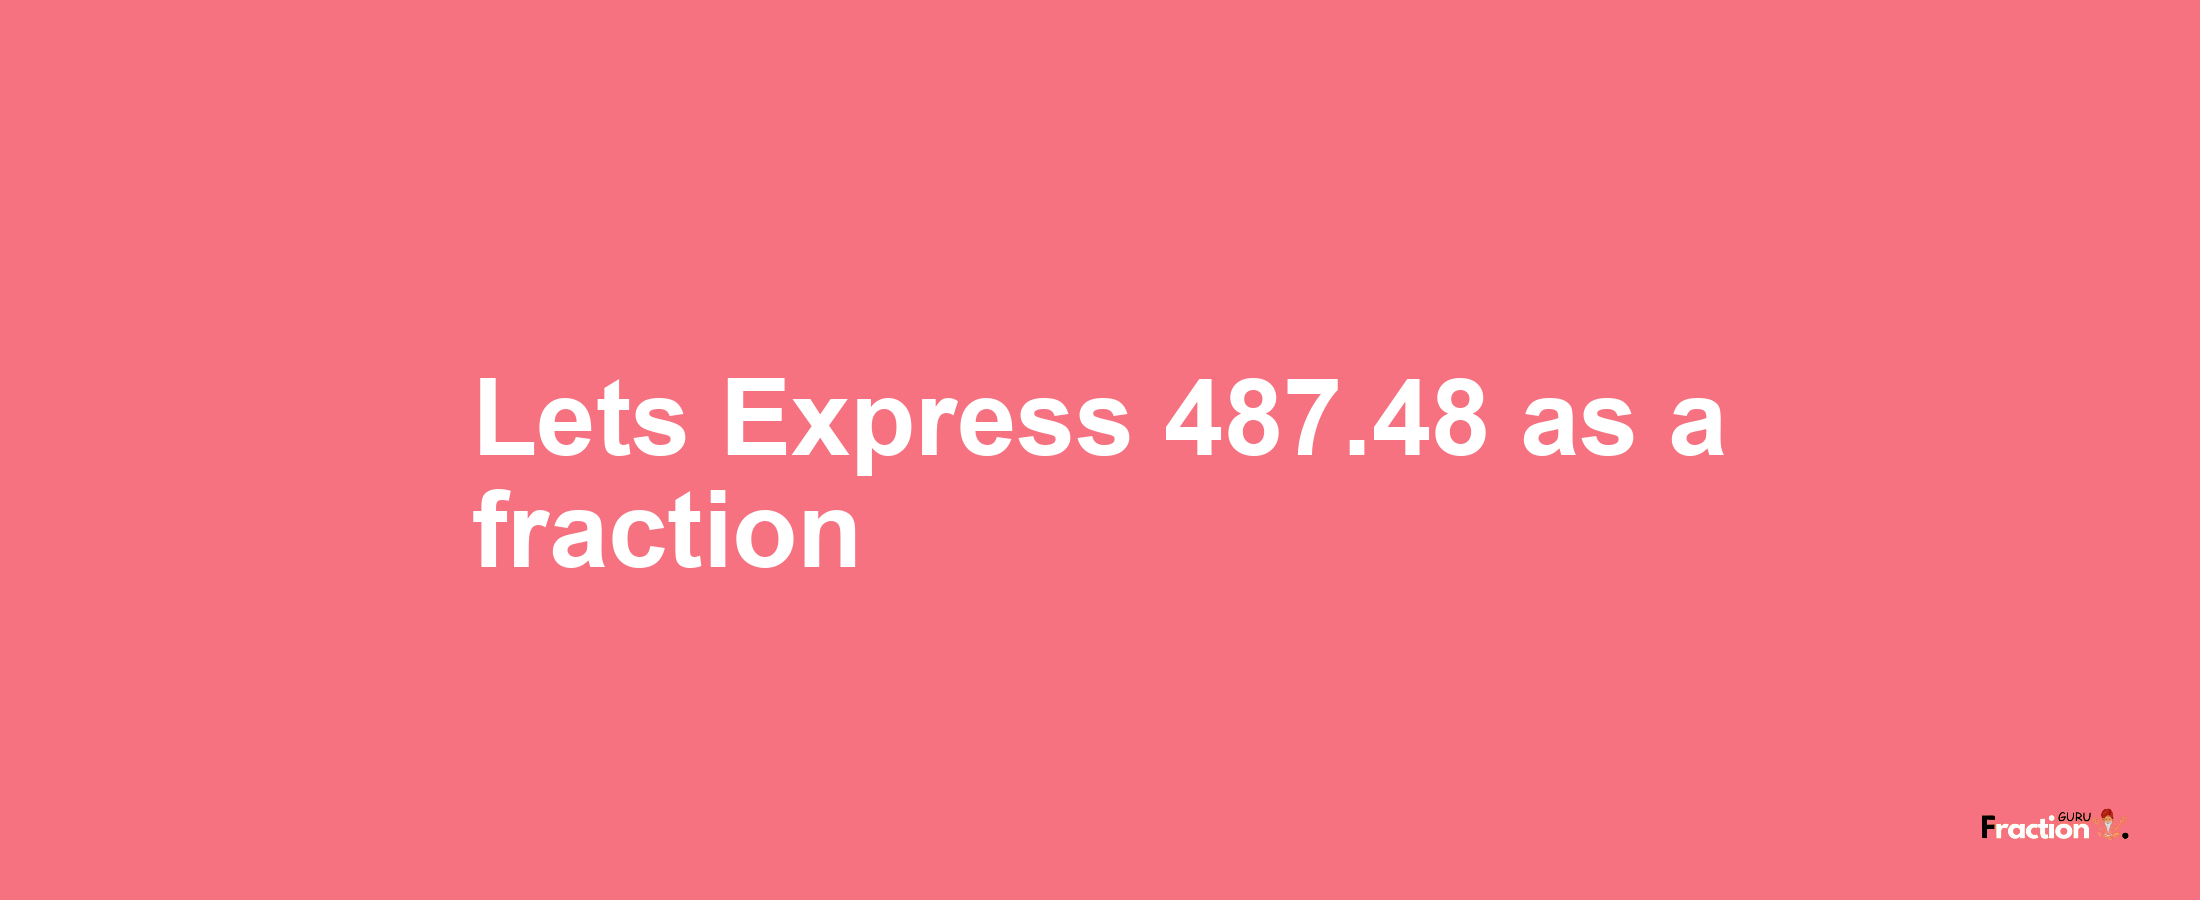 Lets Express 487.48 as afraction